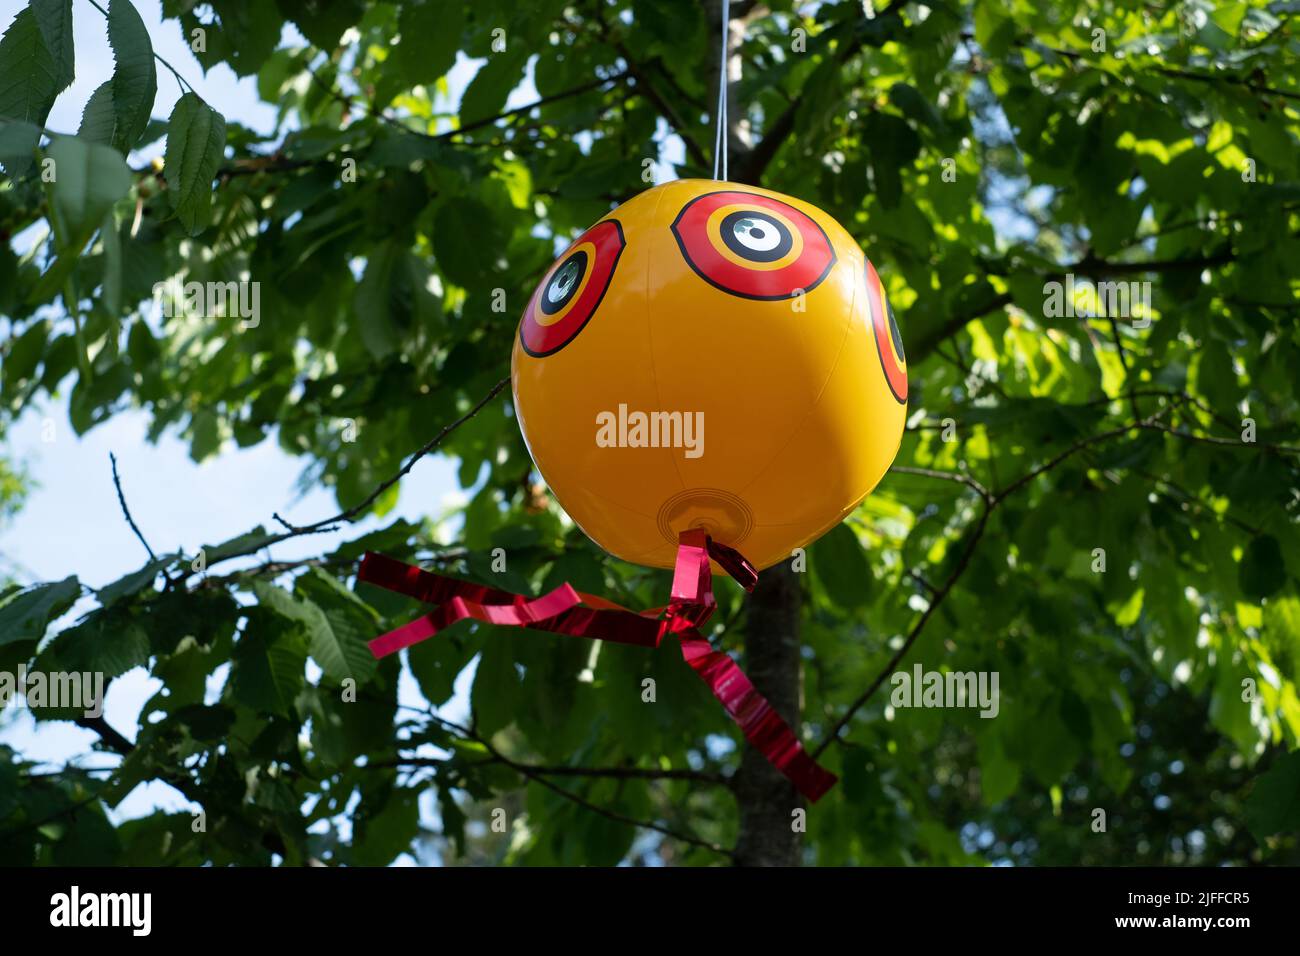 Scare-eye balloon or bird scare ball. Inflated scare-eye bird repellent balloons moving in wind efficiently repel common unwanted pest birds Stock Photo